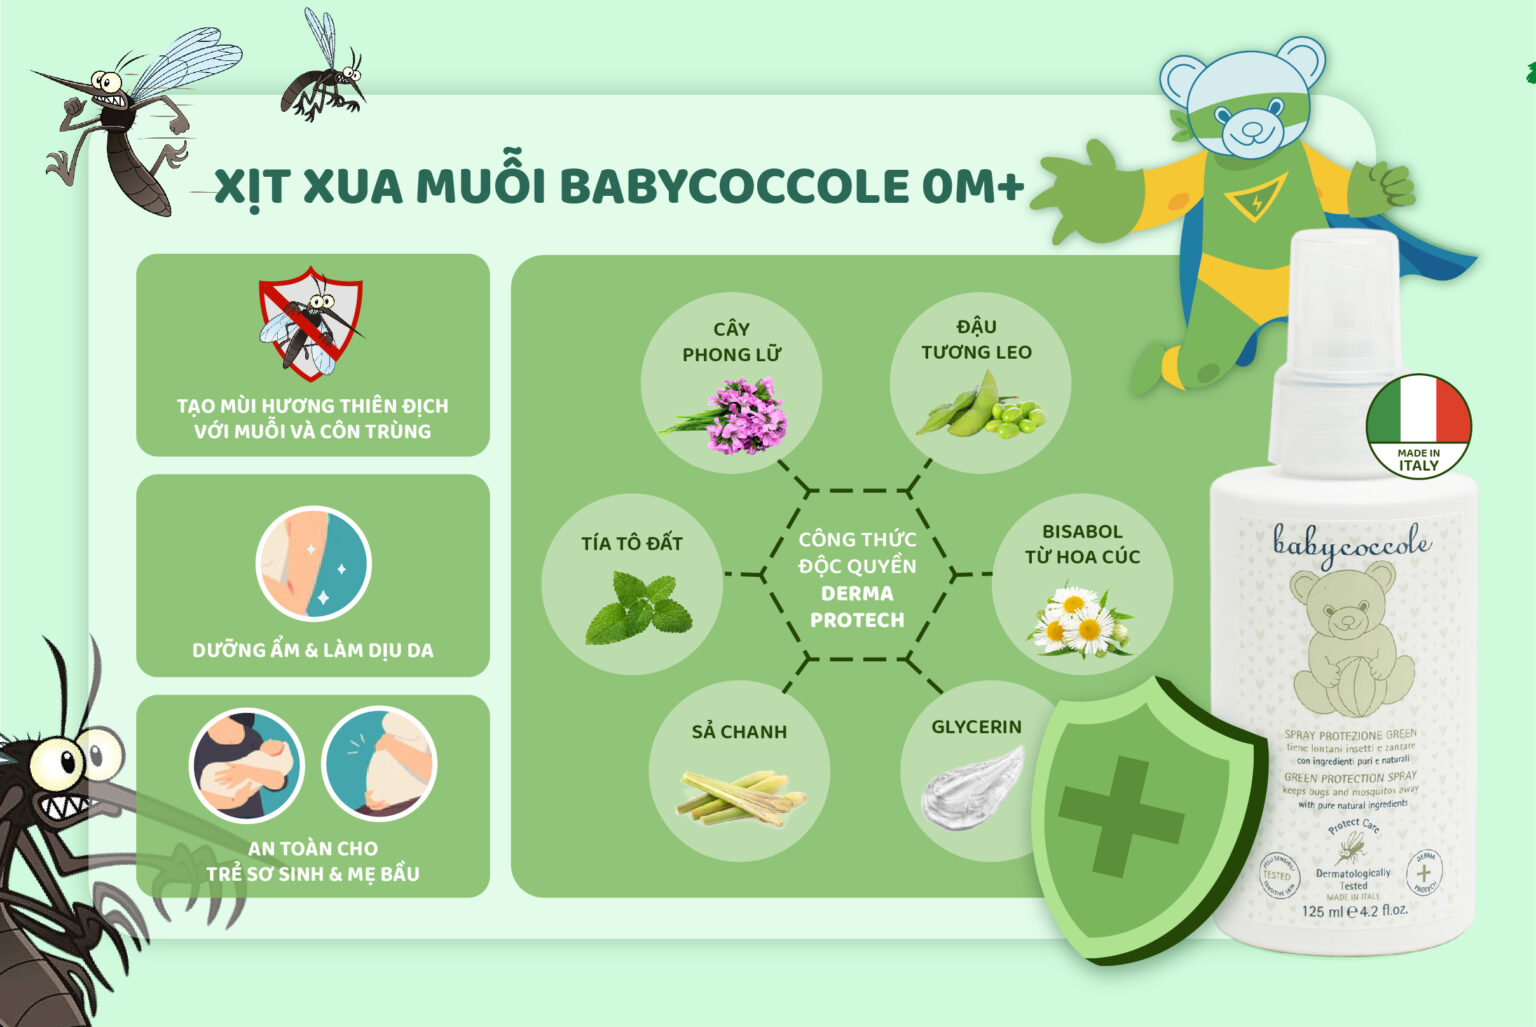 xit-muoi-babycoccole-tp-italy-1536x1027.jpg